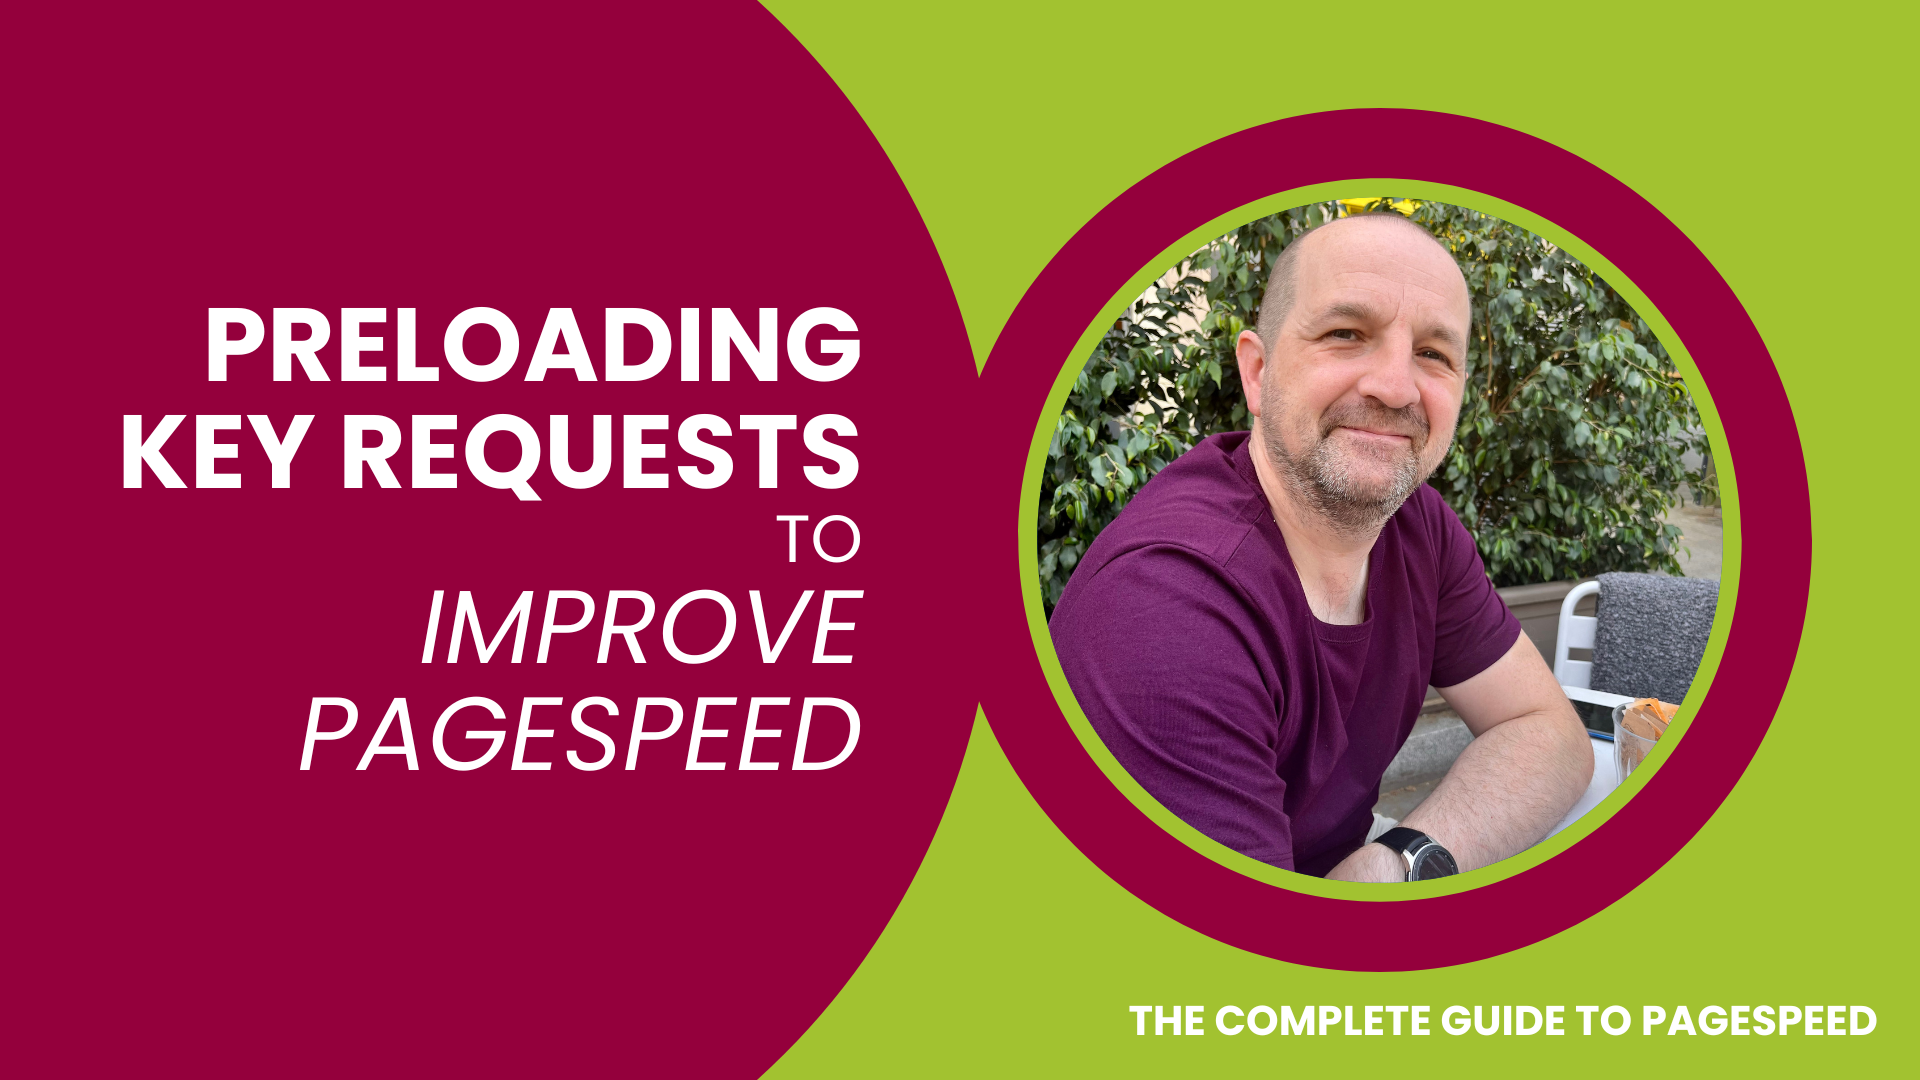 Preloading Key Requests to Improve Pagespeed